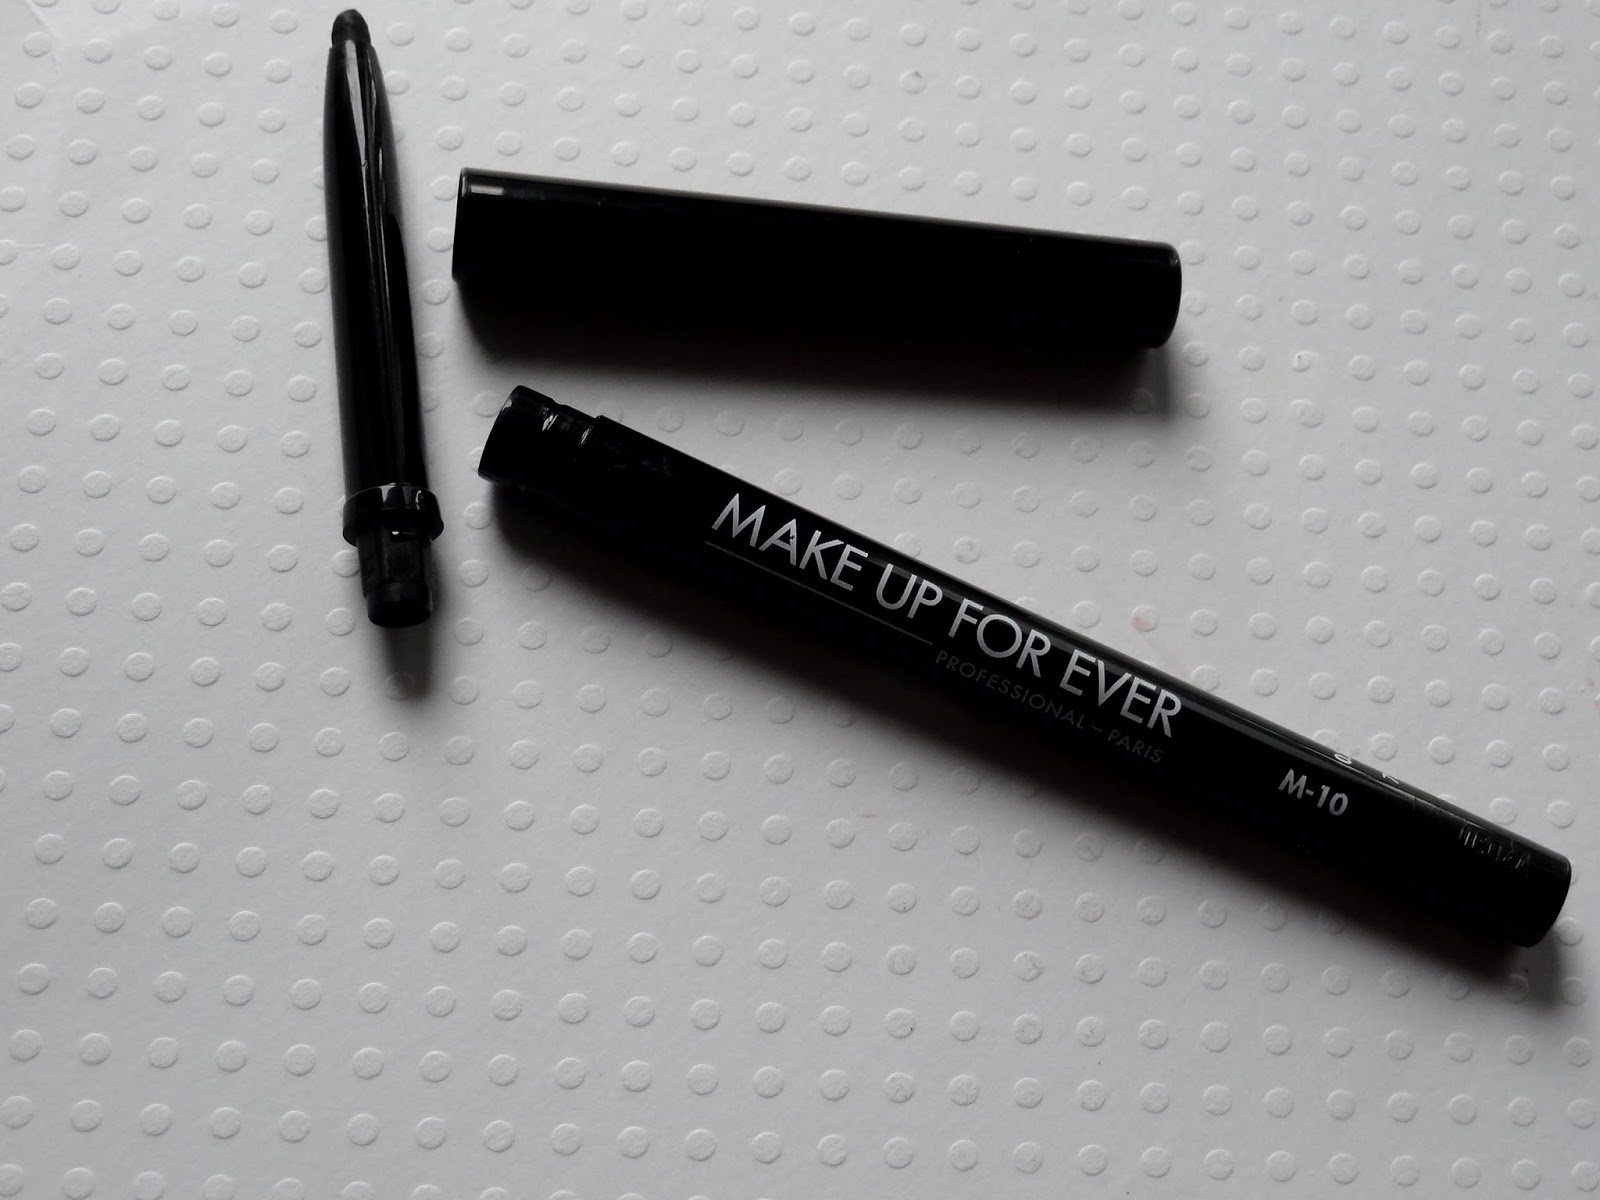 make up for ever eyeliner in m10 Review, Photos & Swatches